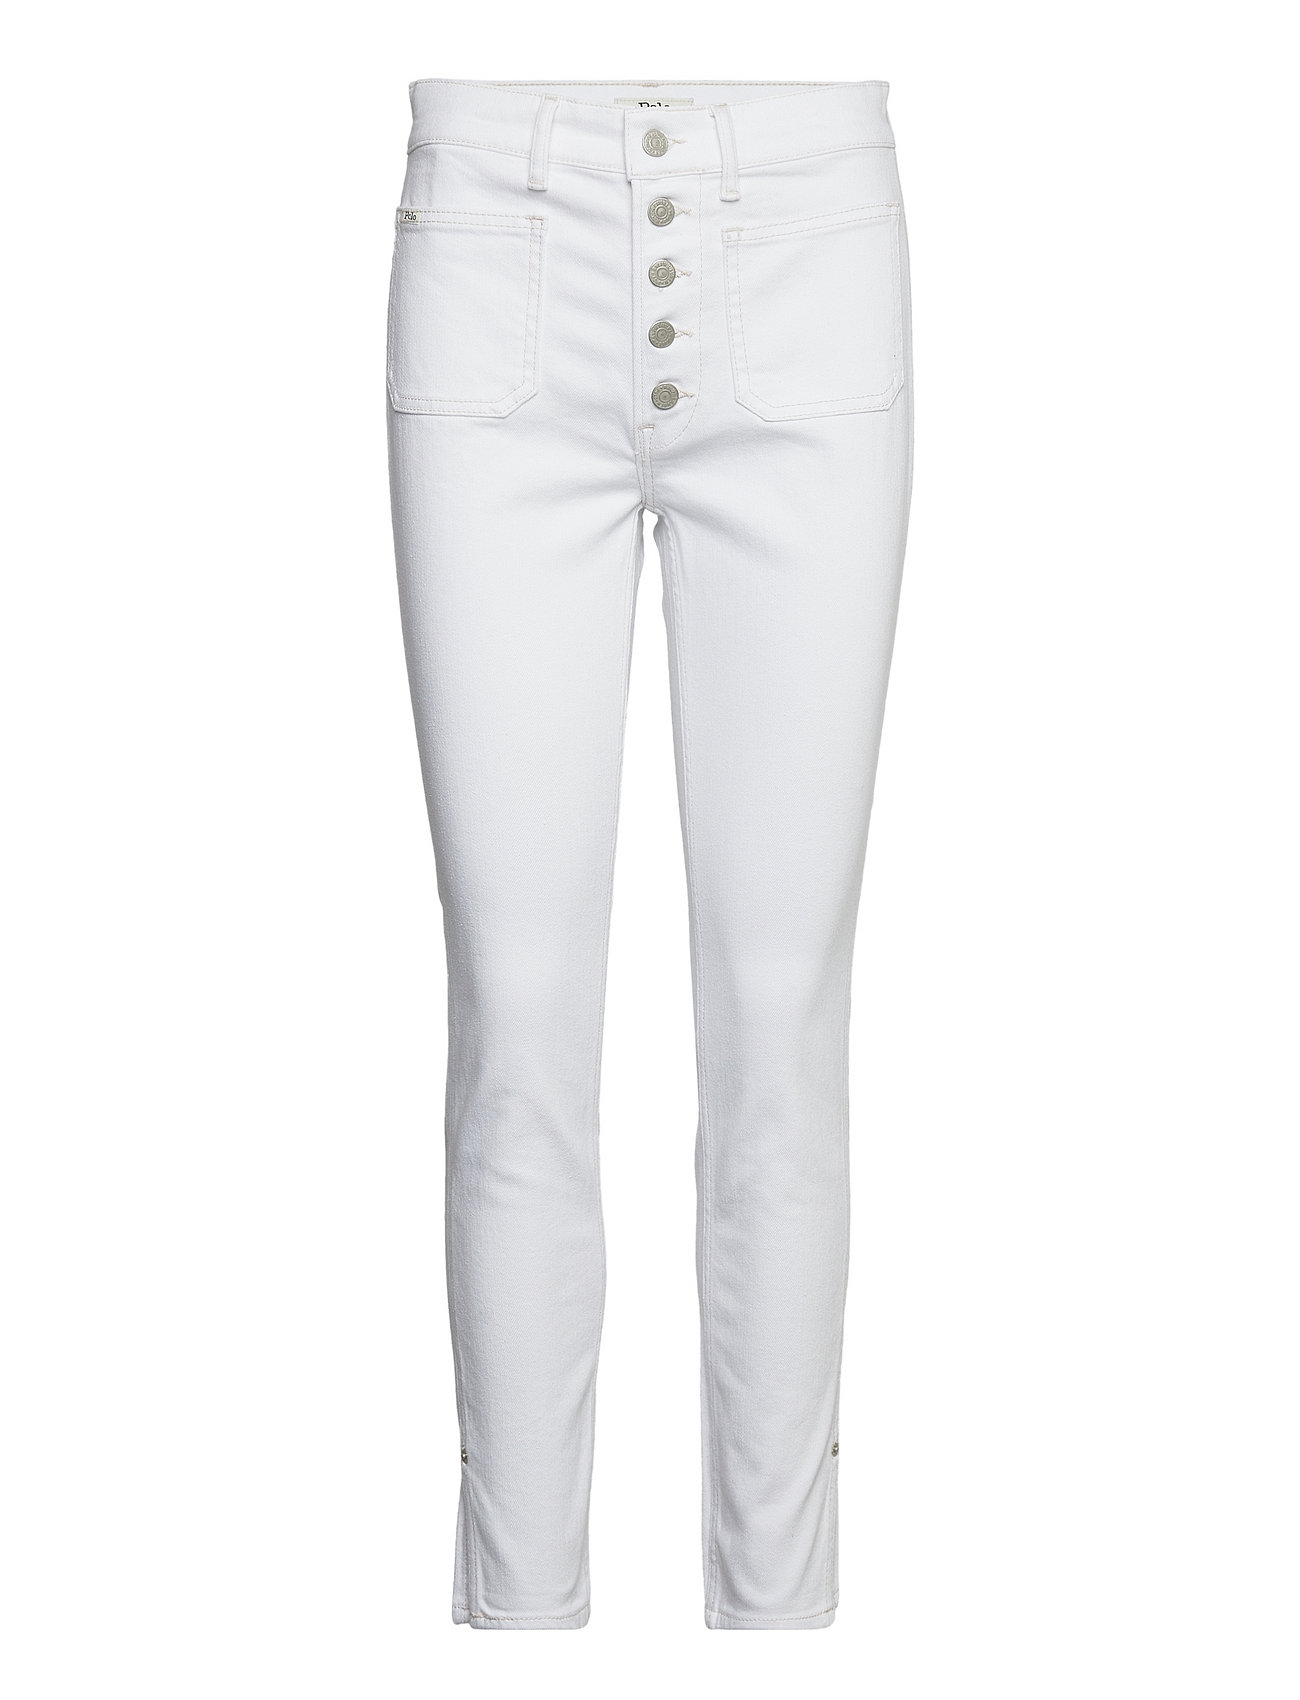 Tompkins High-Rise Skinny Jean Bottoms Trousers Chinos White Polo Ralph Lauren